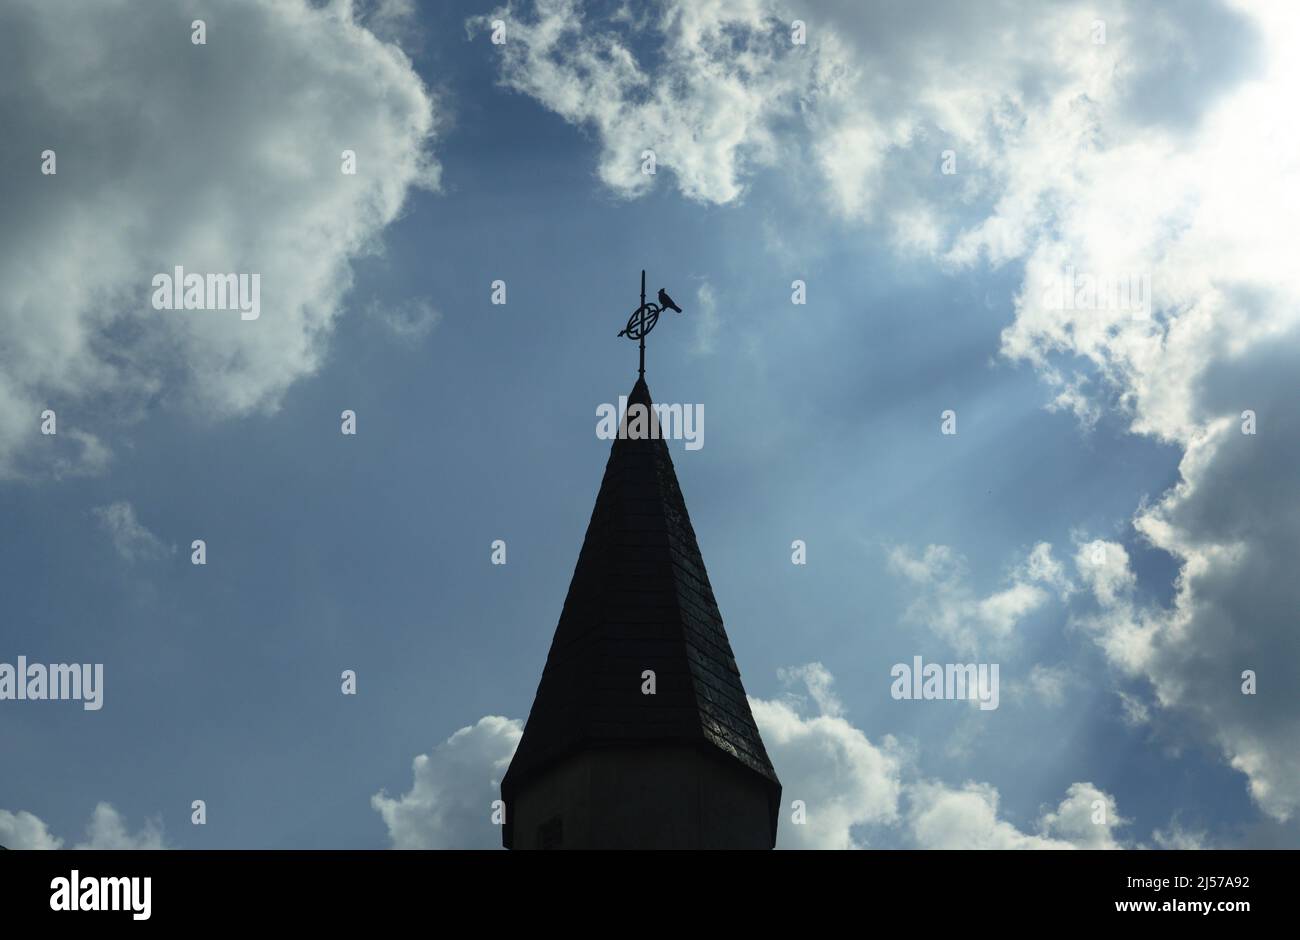 A bird perches on the weathervane on a church steeple. Clouds lit by the sun, and sunrays stretch outwards Stock Photo